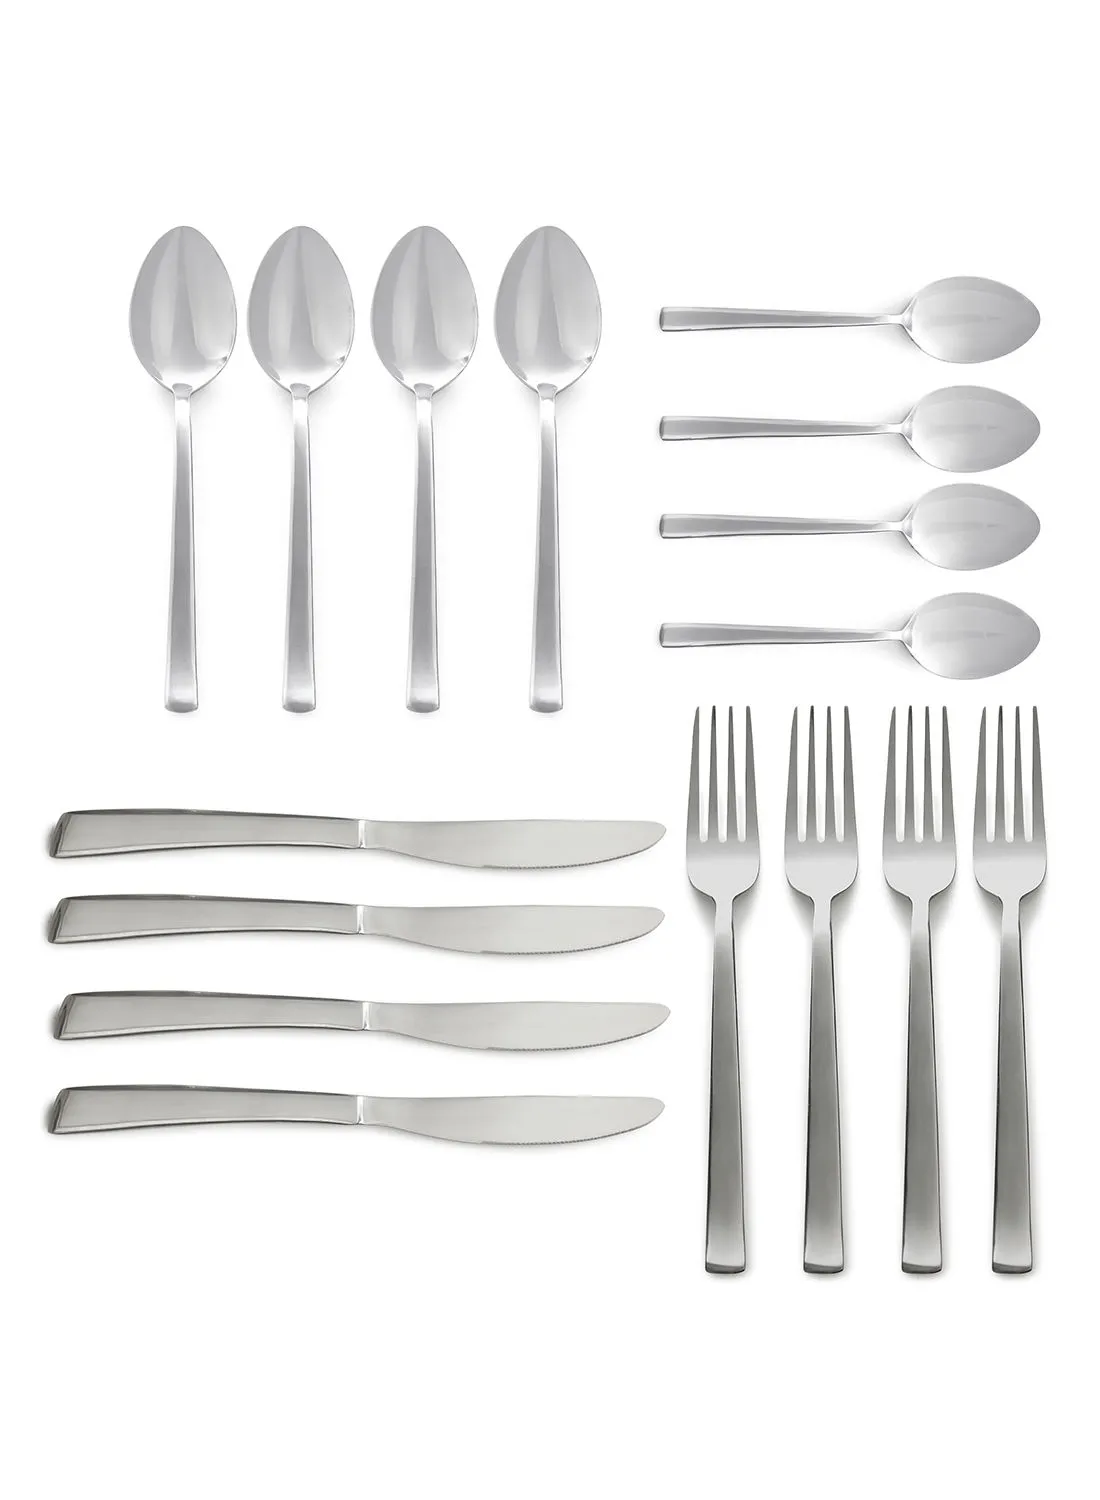 noon east 16 Piece Cutlery Set - Made Of Stainless Steel - Silverware Flatware - Spoons And Forks Set, Spoon Set - Table Spoons, Tea Spoons, Forks, Knives - Serves 4 - Design Silver Spade